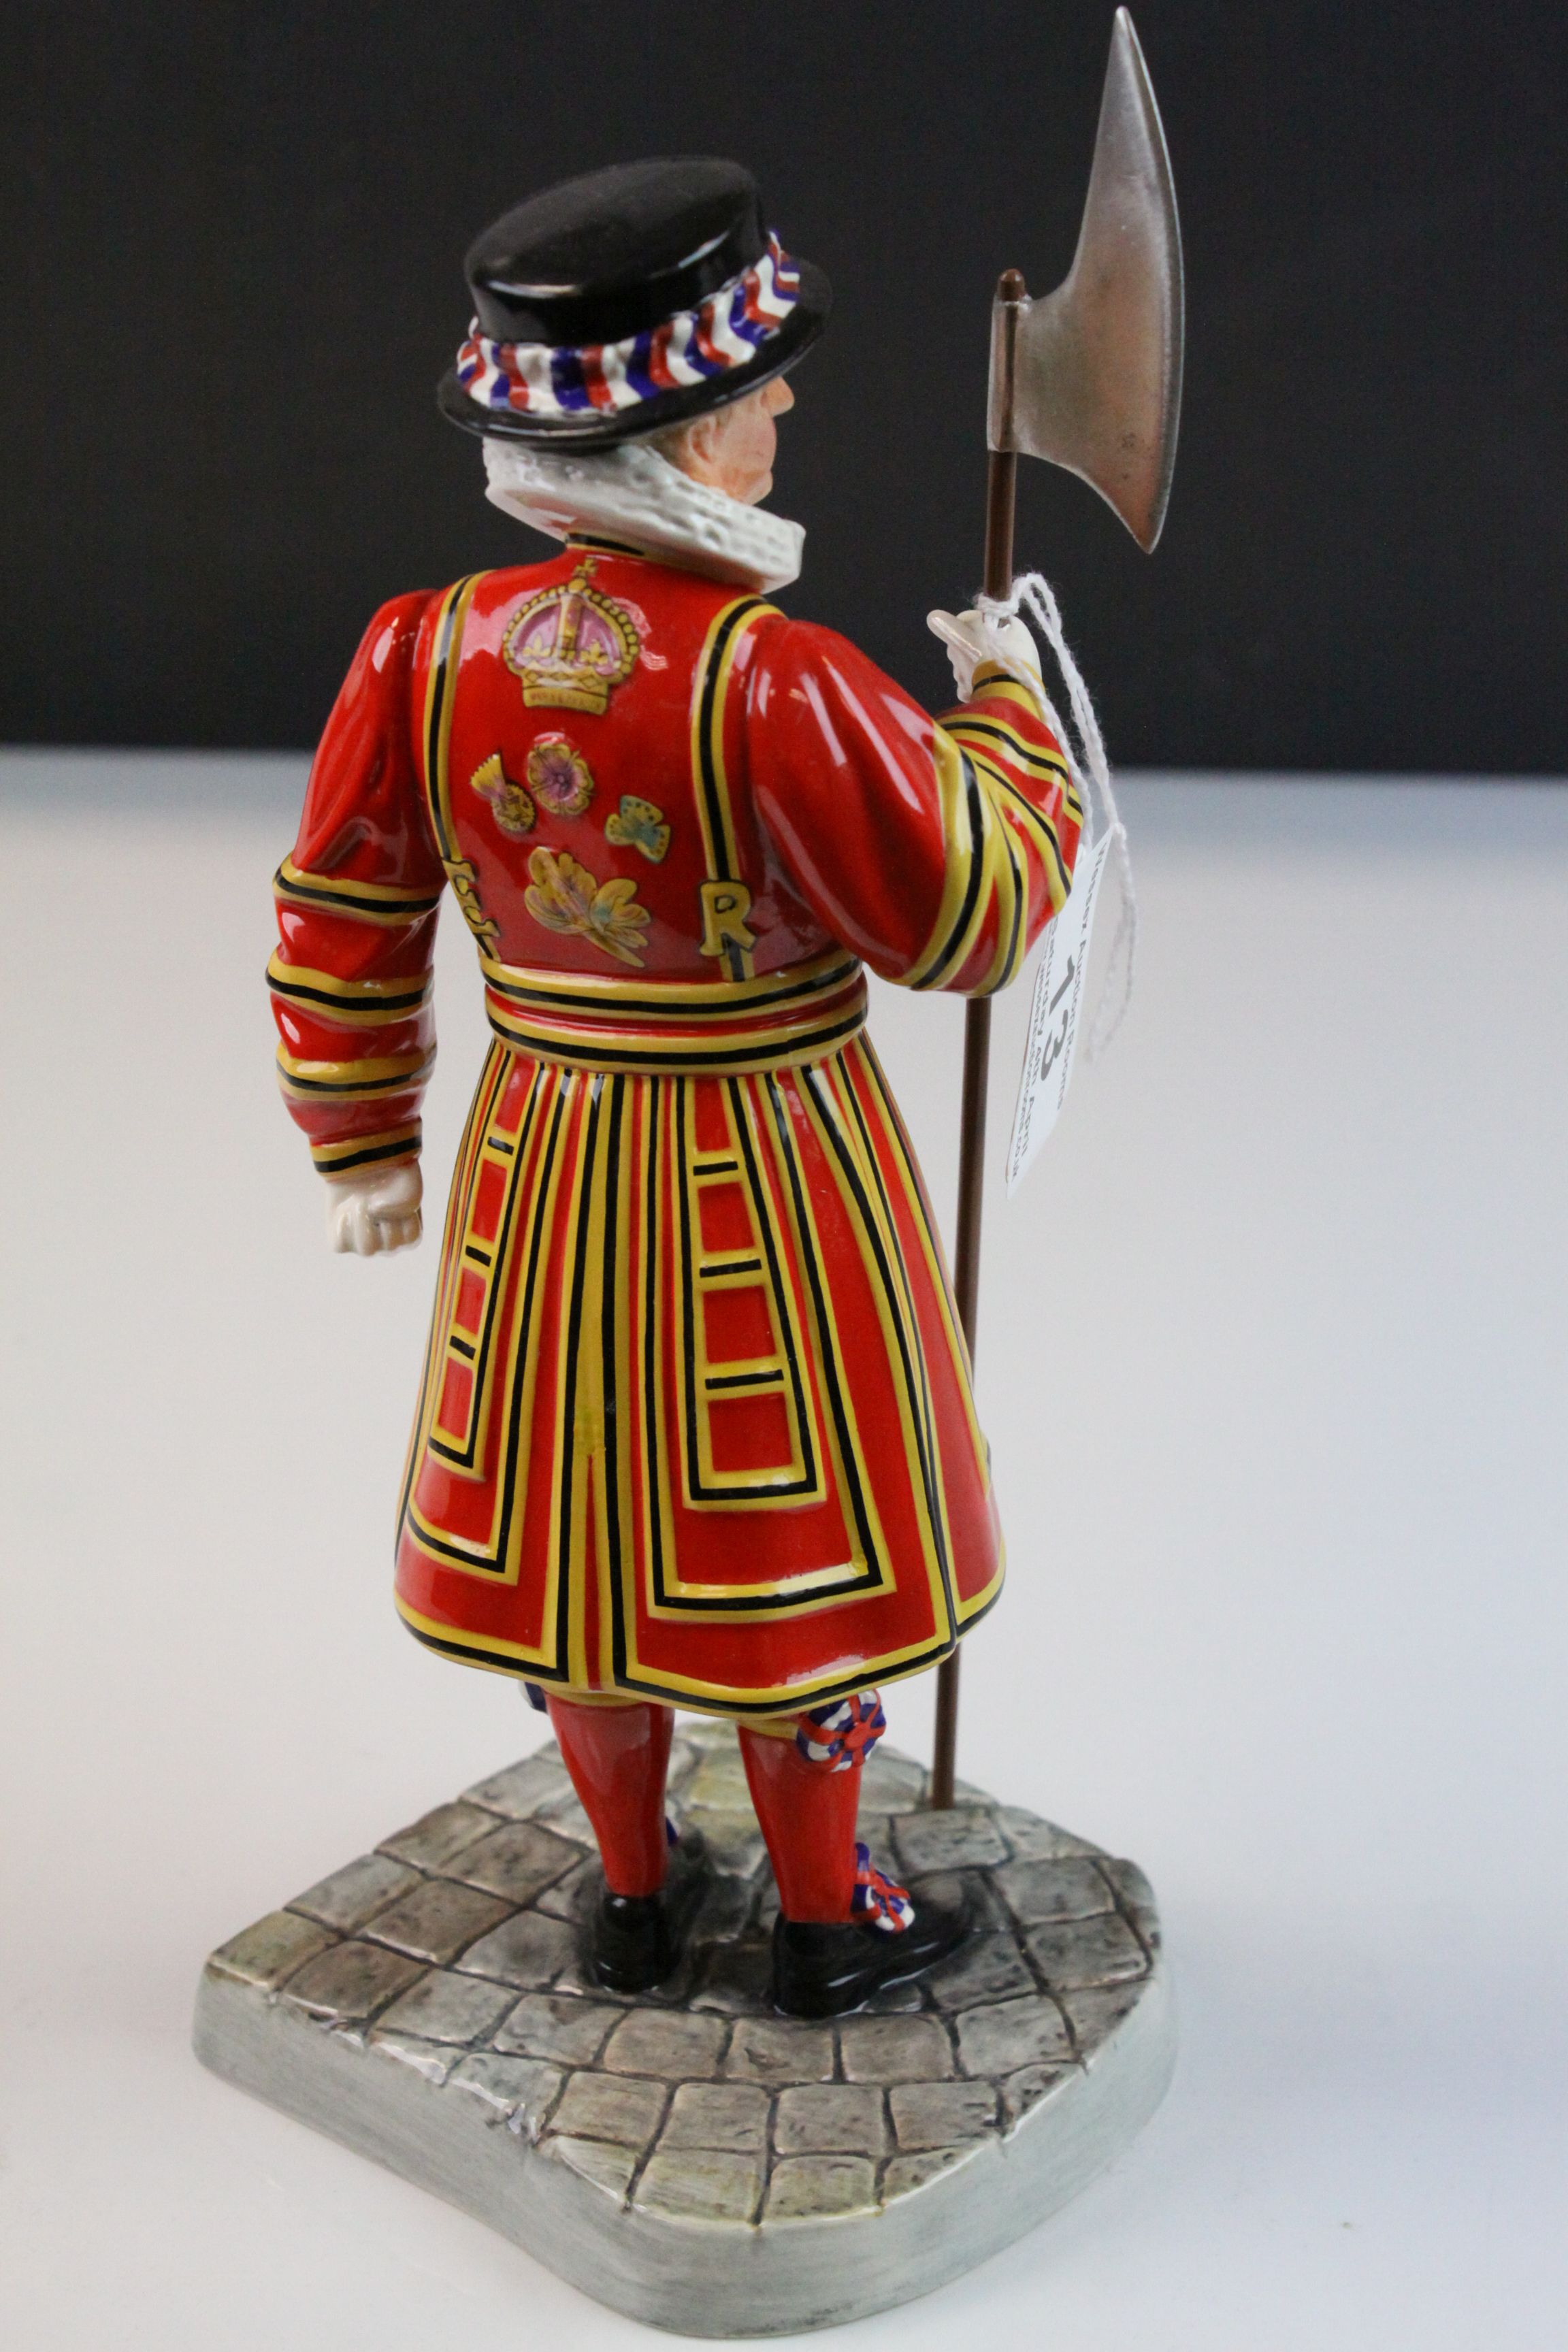 Royal Doulton figure of a Tower of London Beefeater, numbered HN5362 - Image 3 of 5